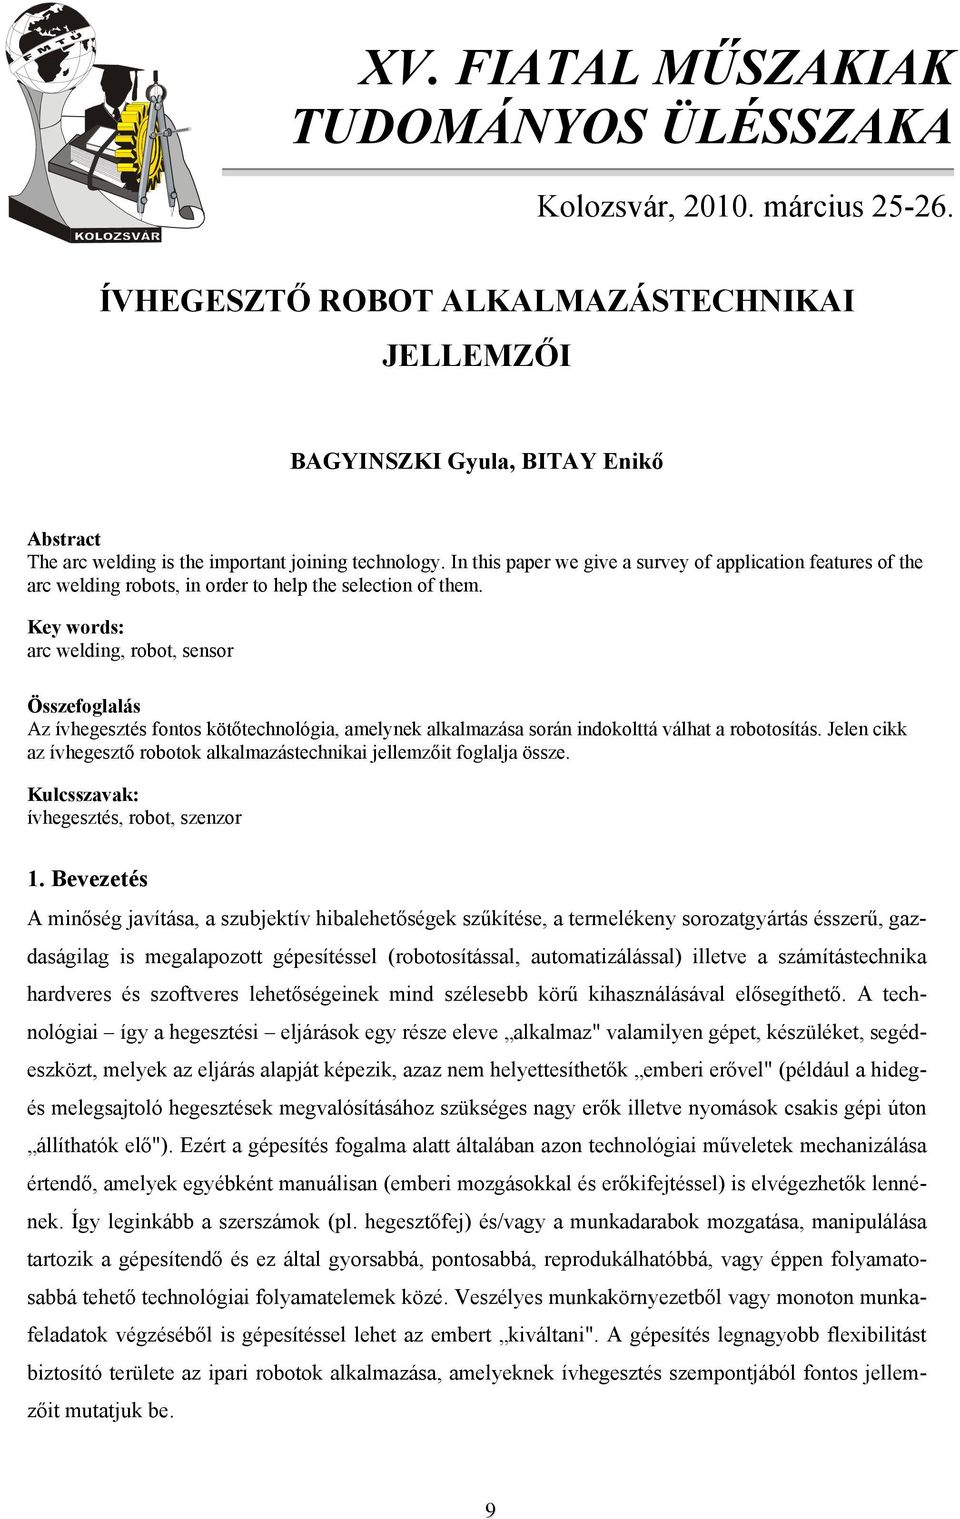 In this paper we give a survey of application features of the arc welding robots, in order to help the selection of them.